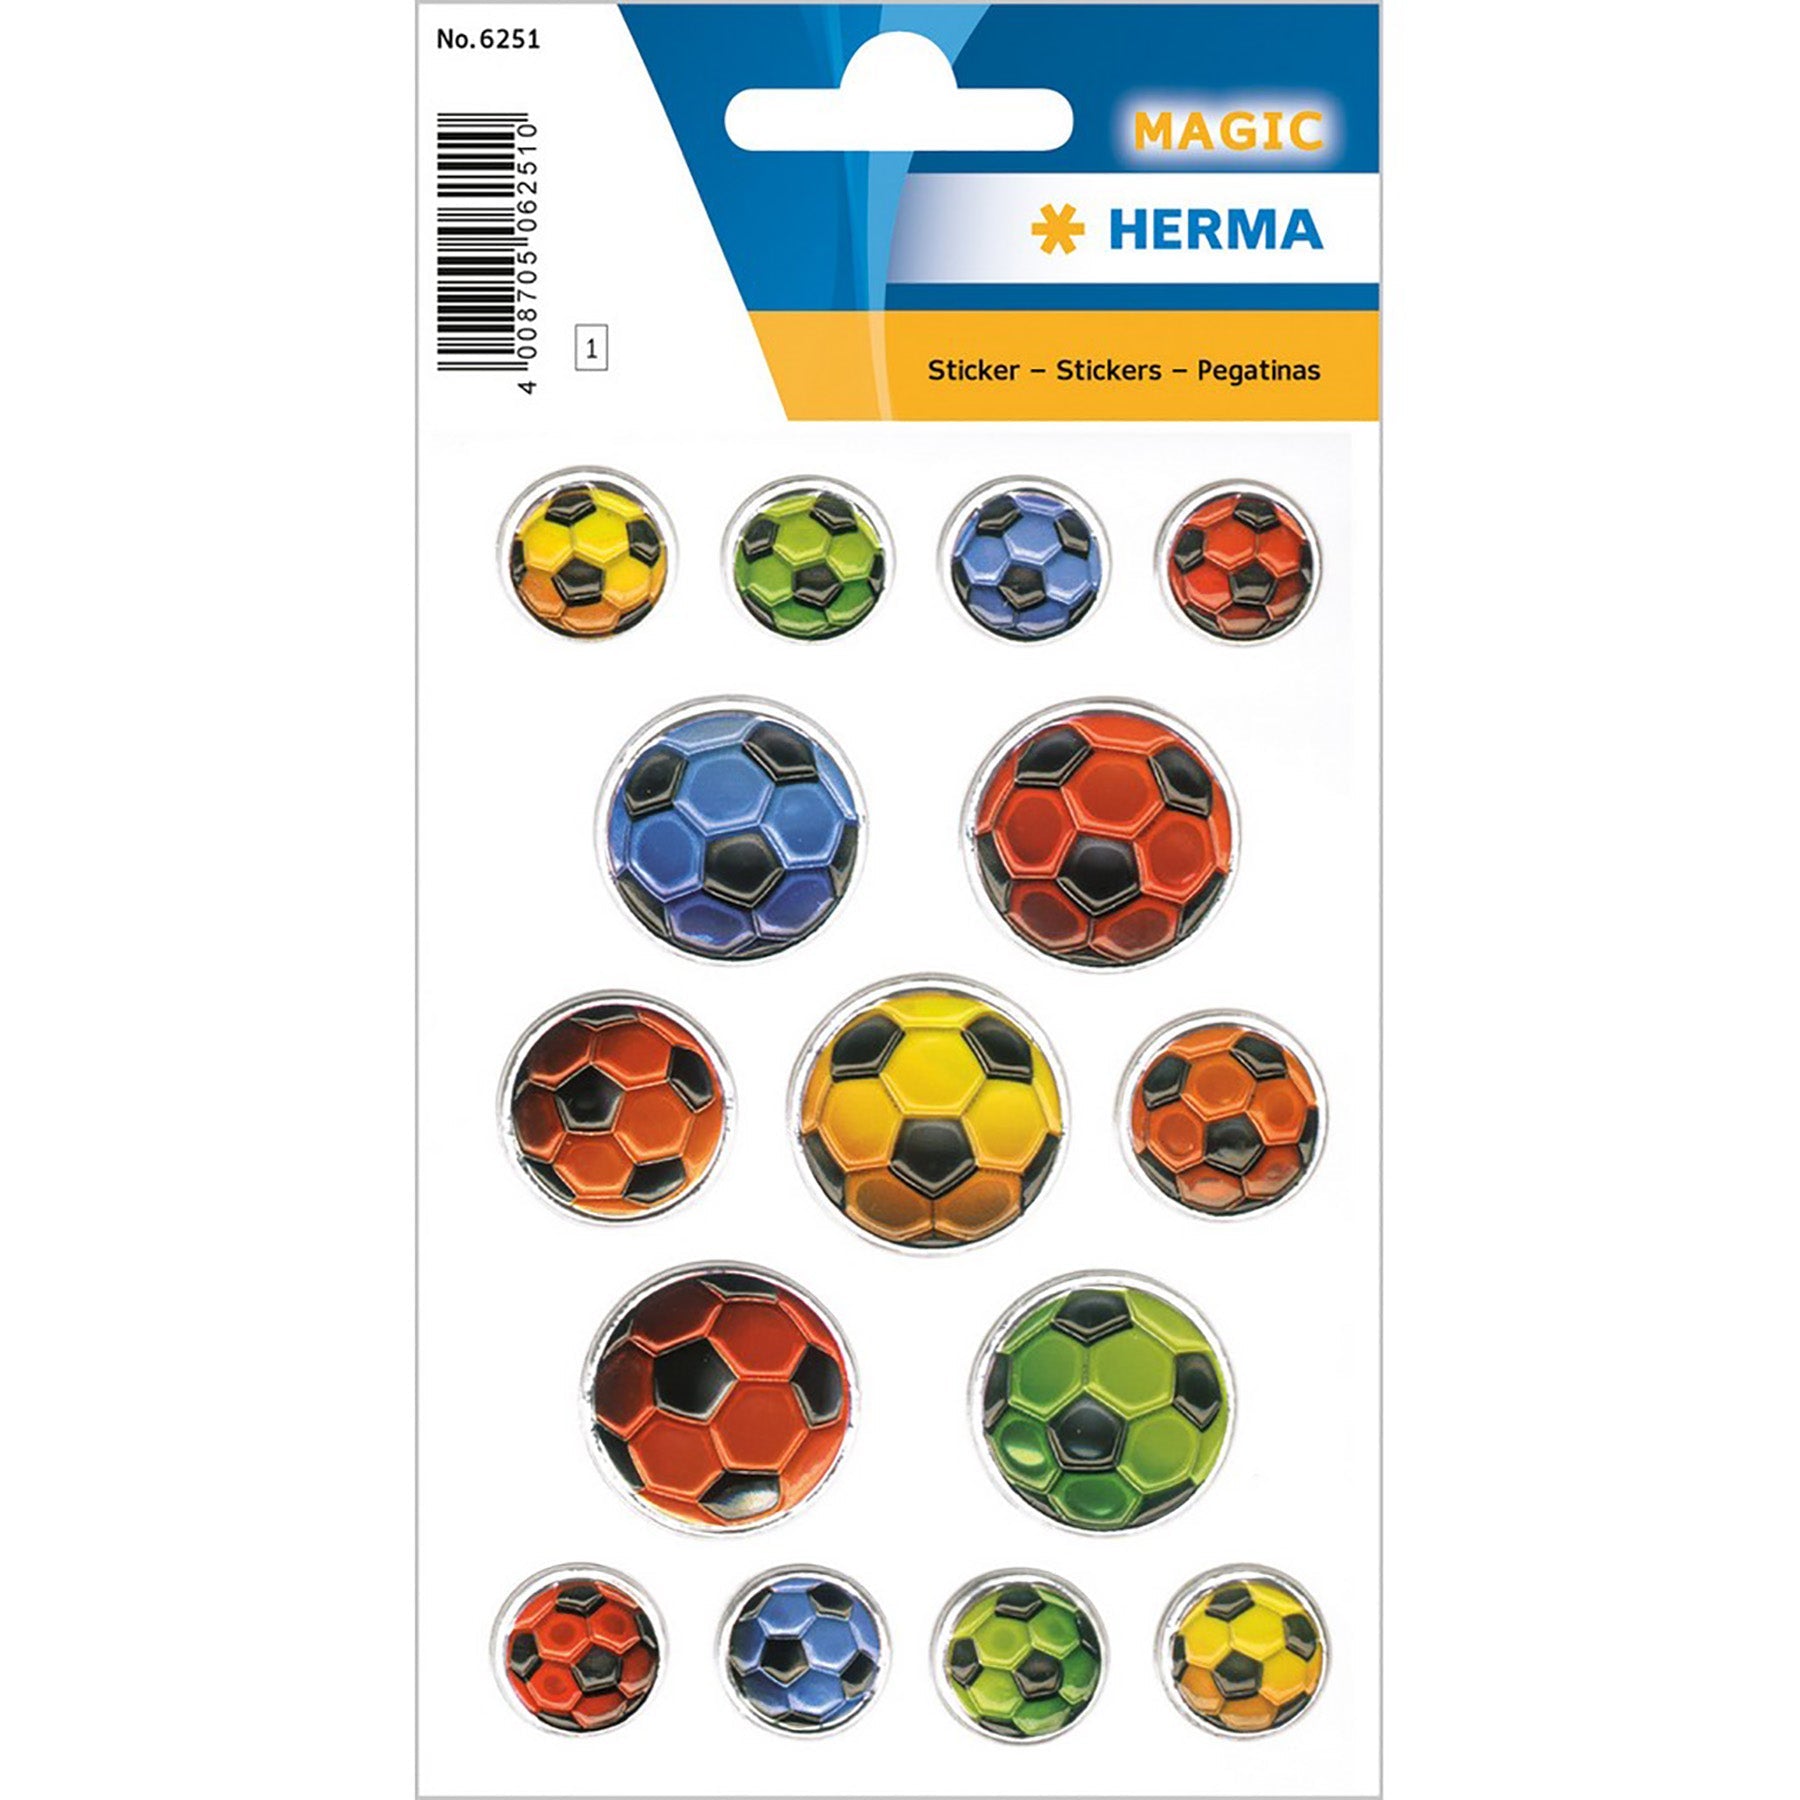 Herma Magic Stickers Colored Soccer Balls Embossed 4.75x3.1in Sheet